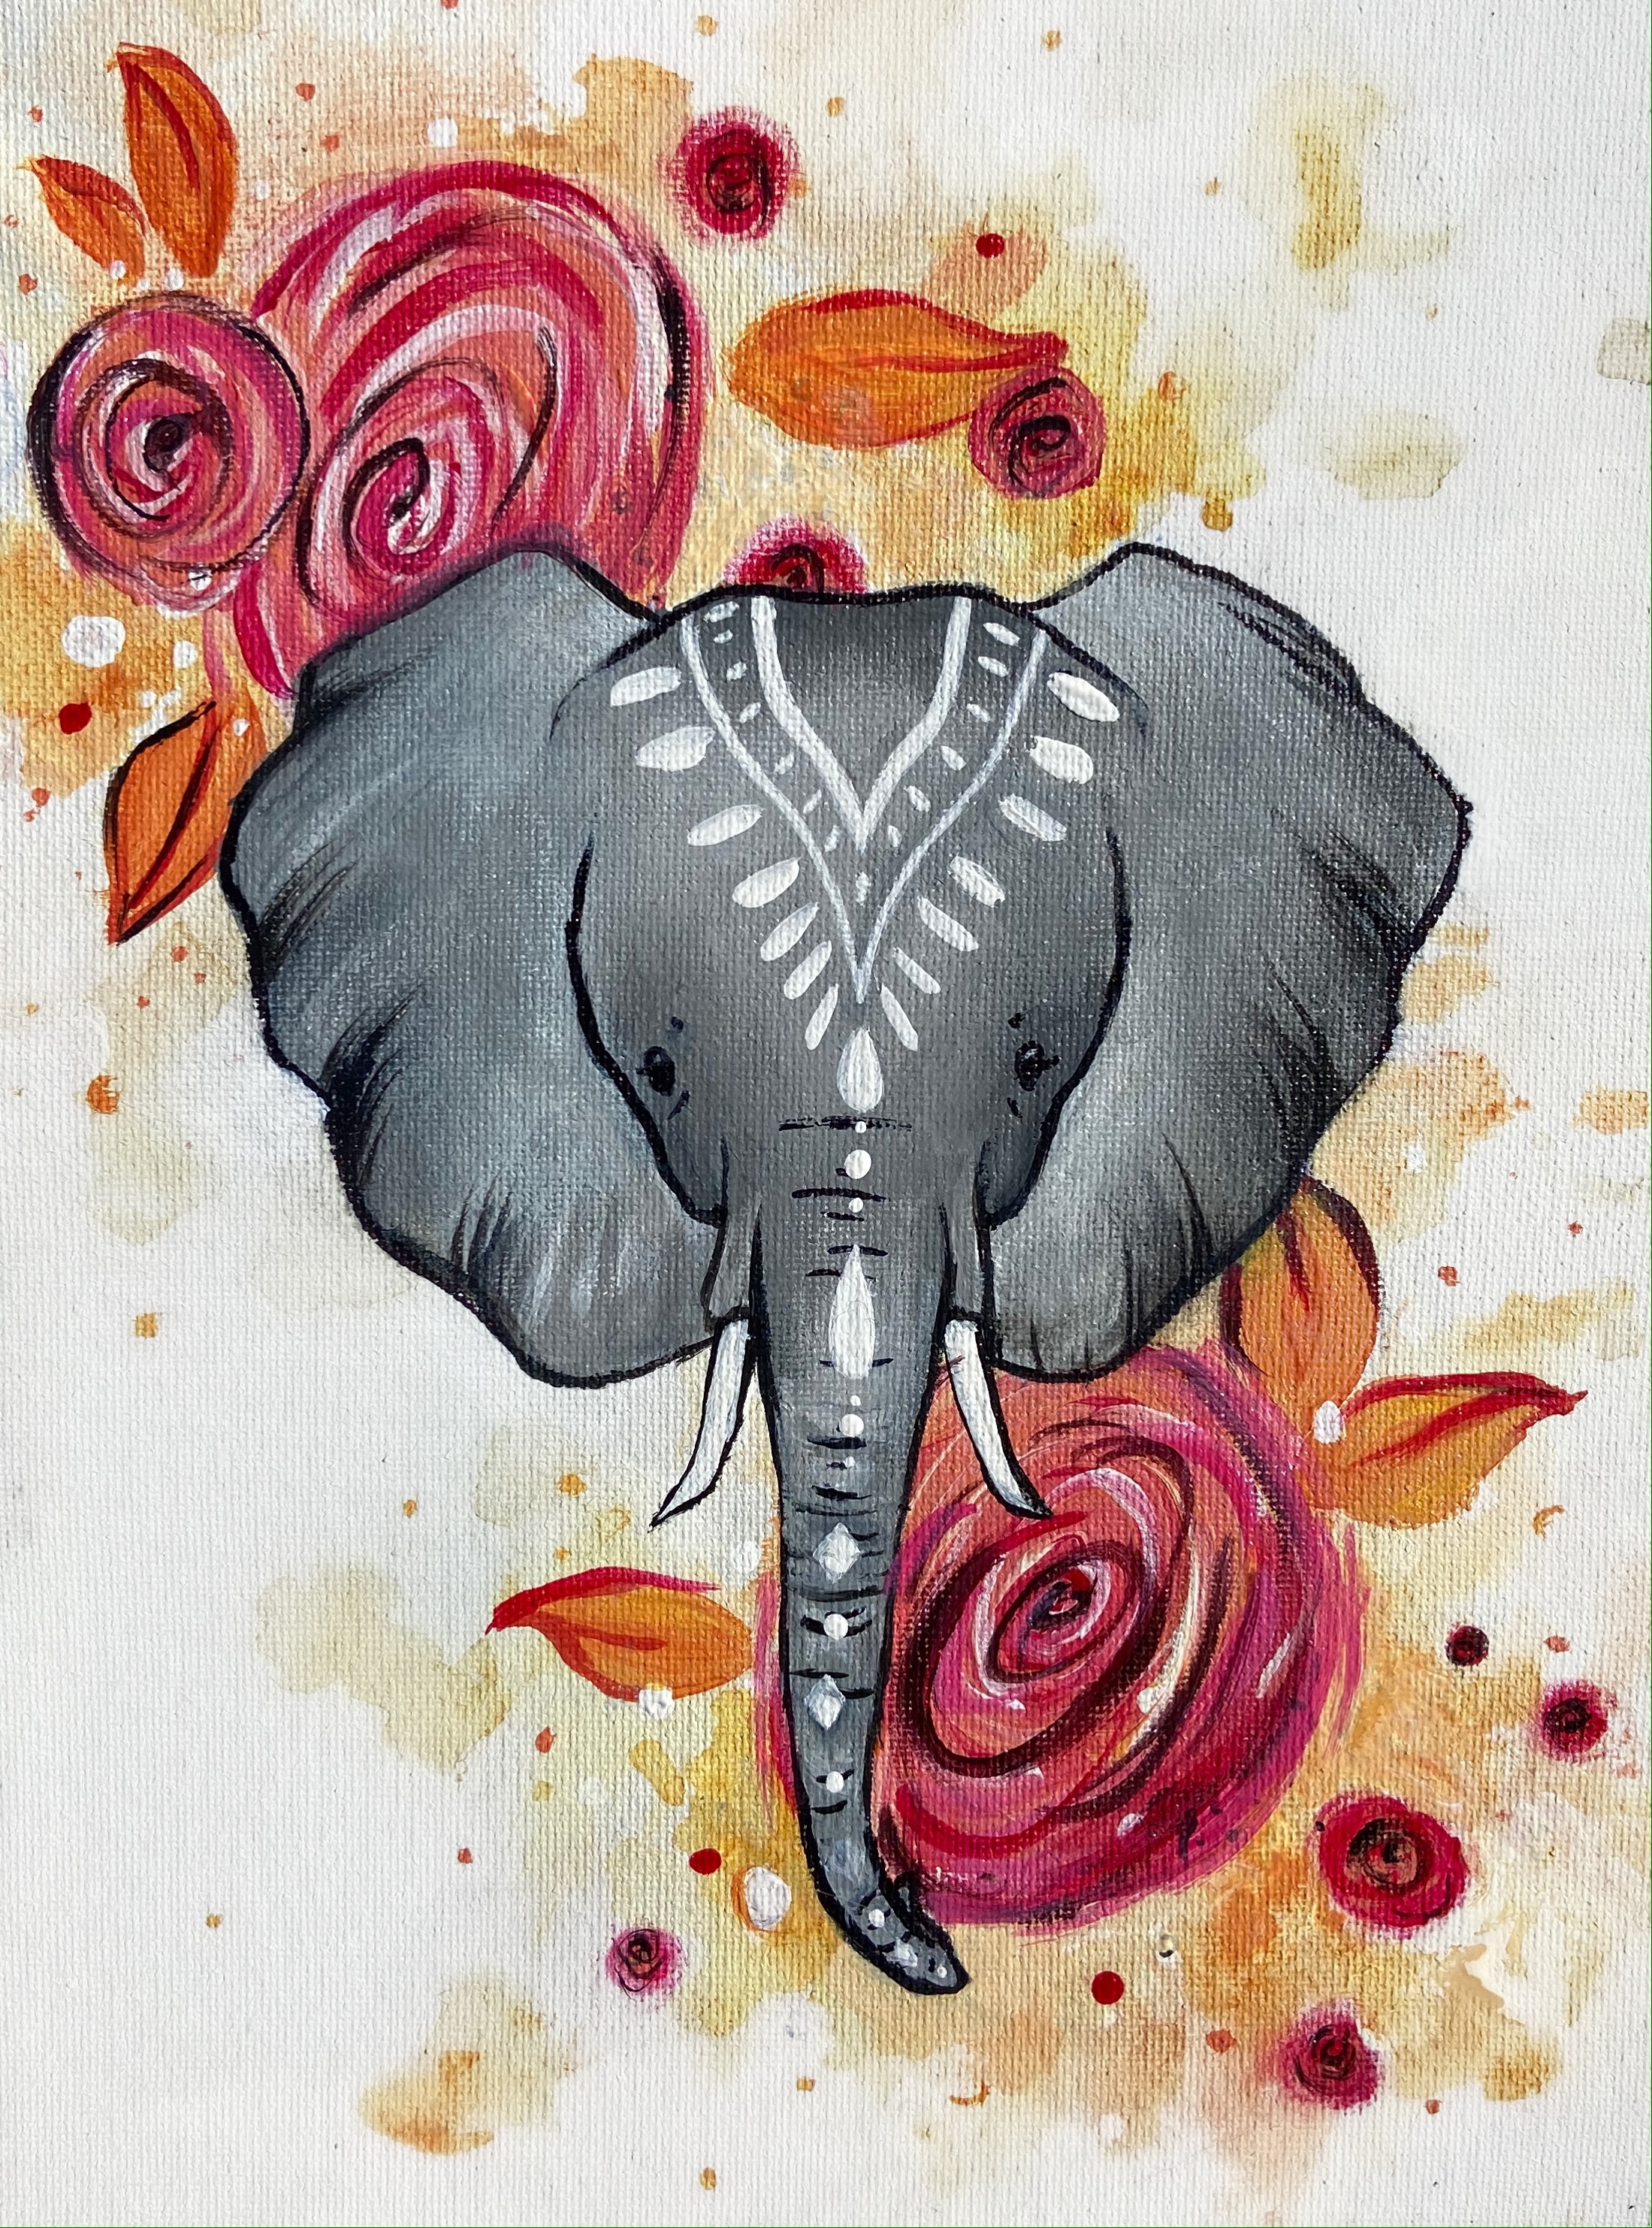 A Floral Boho Elephant experience project by Yaymaker